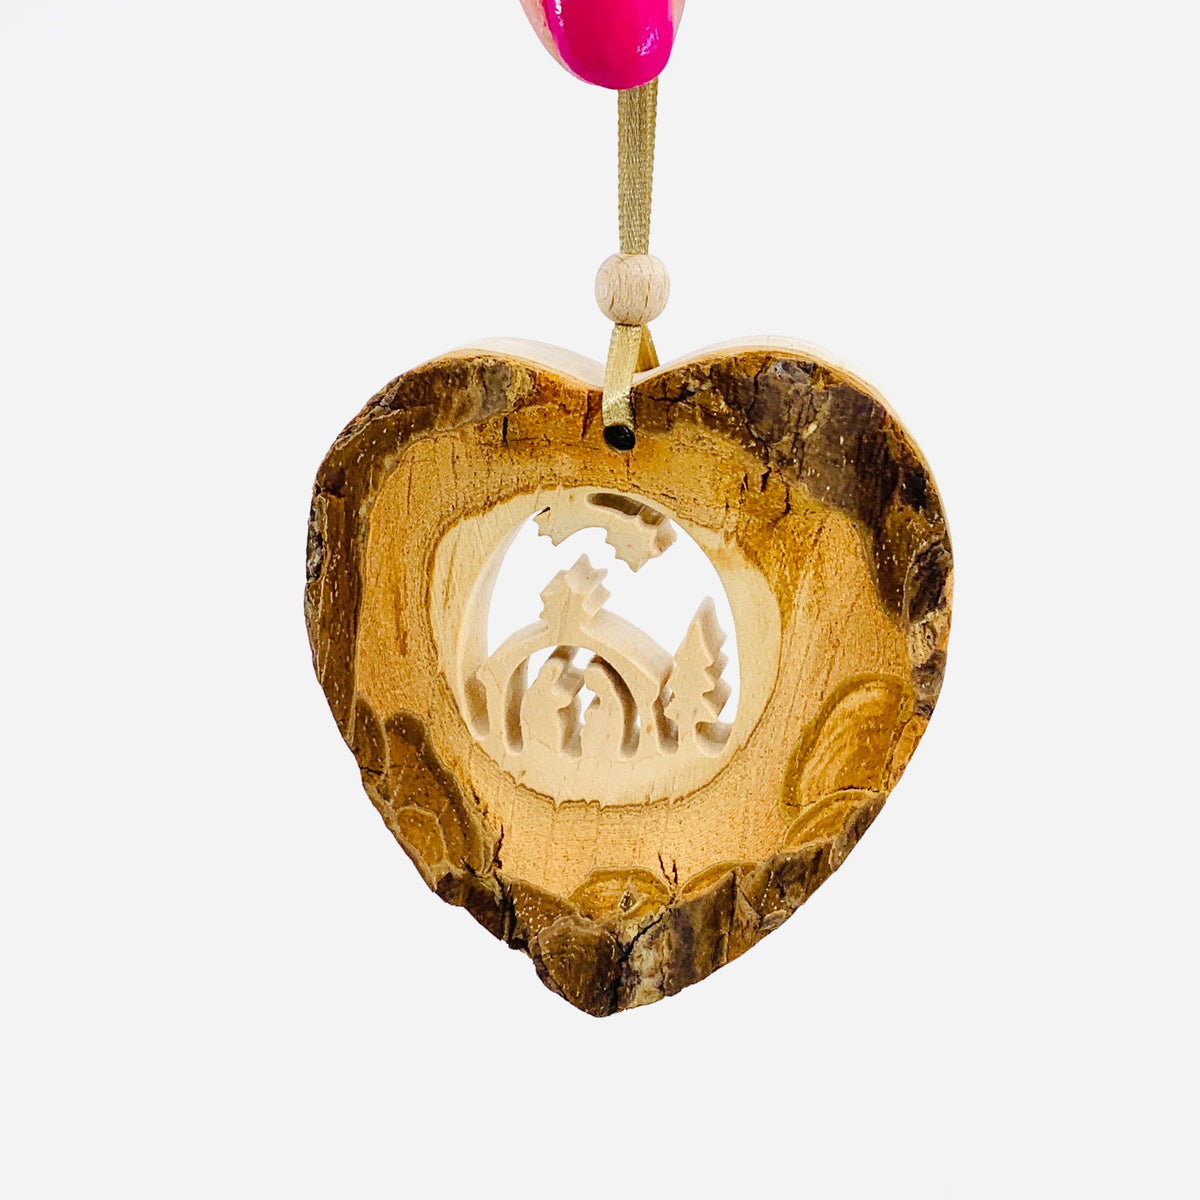 Hand Carved Heart Ornament with Nativity Scene 6